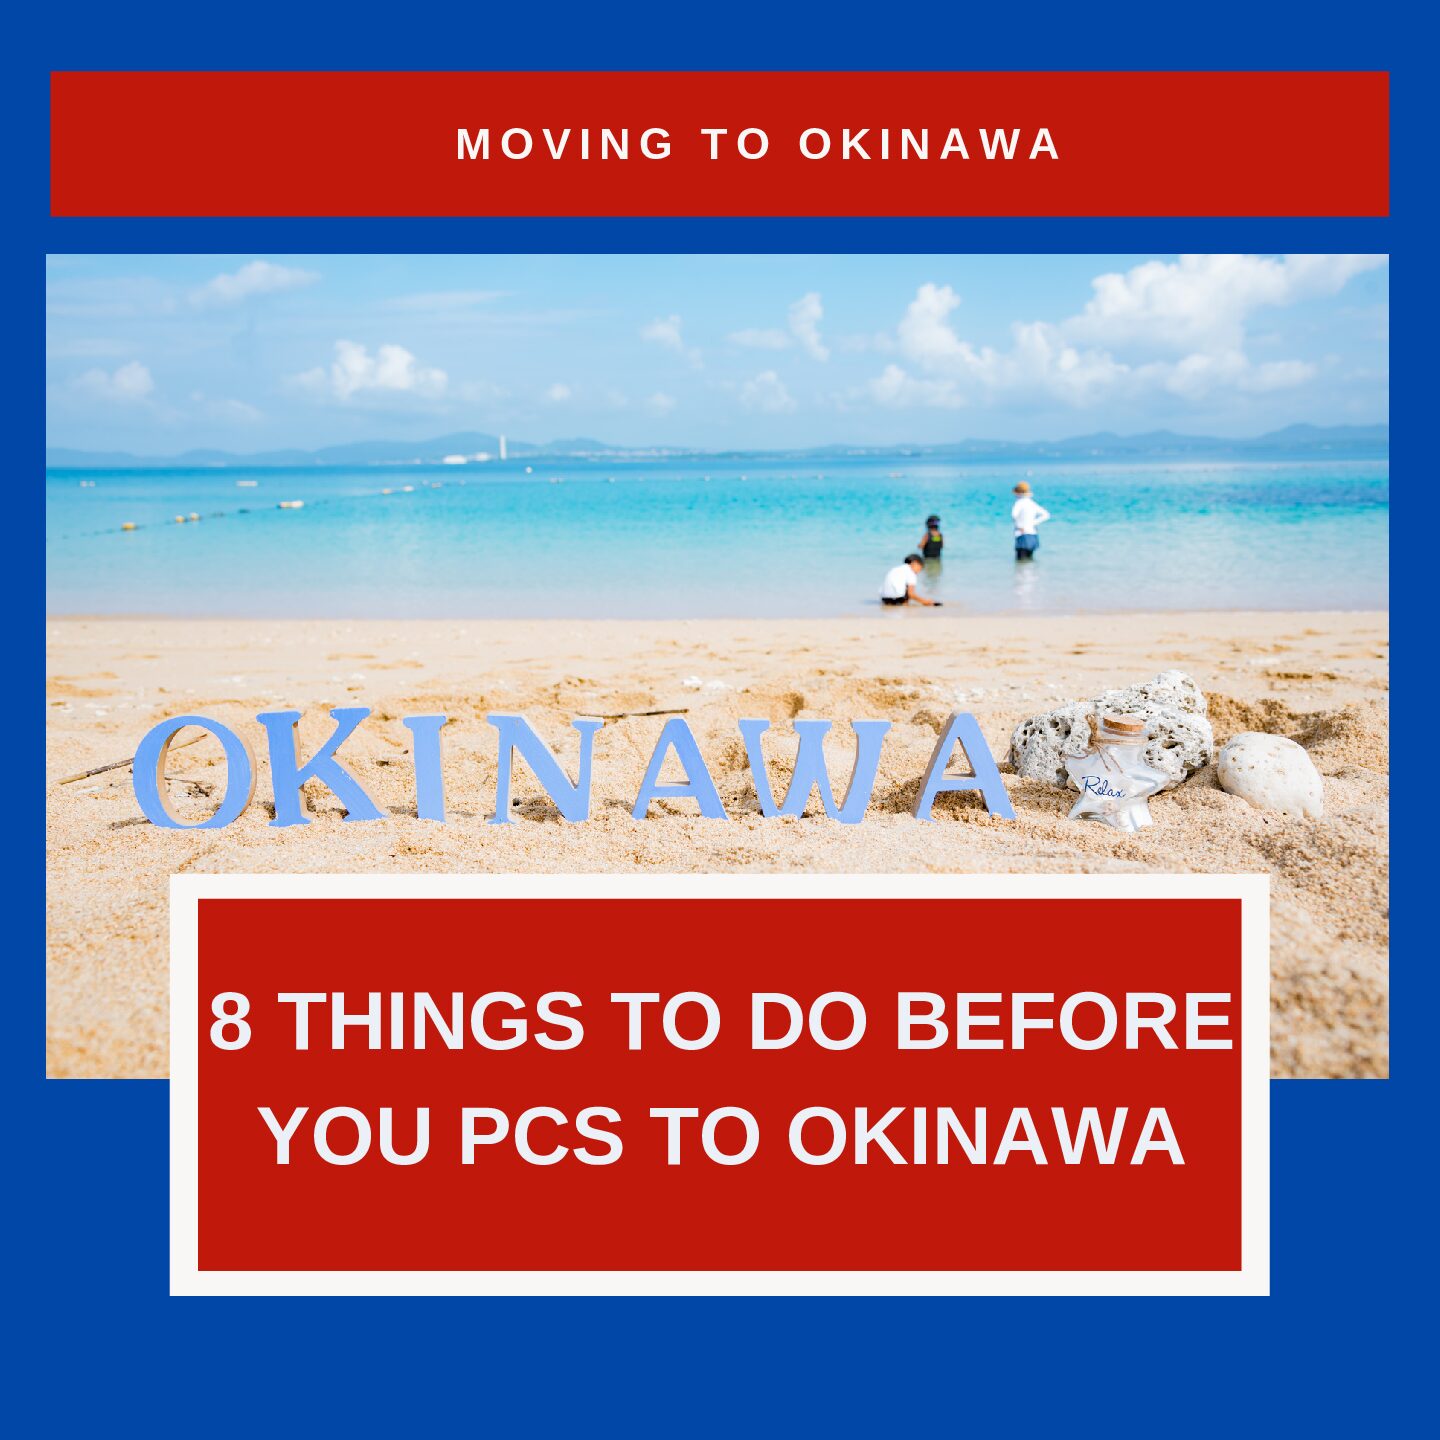 8 Things You Need to Do Before You PCS to Okinawa